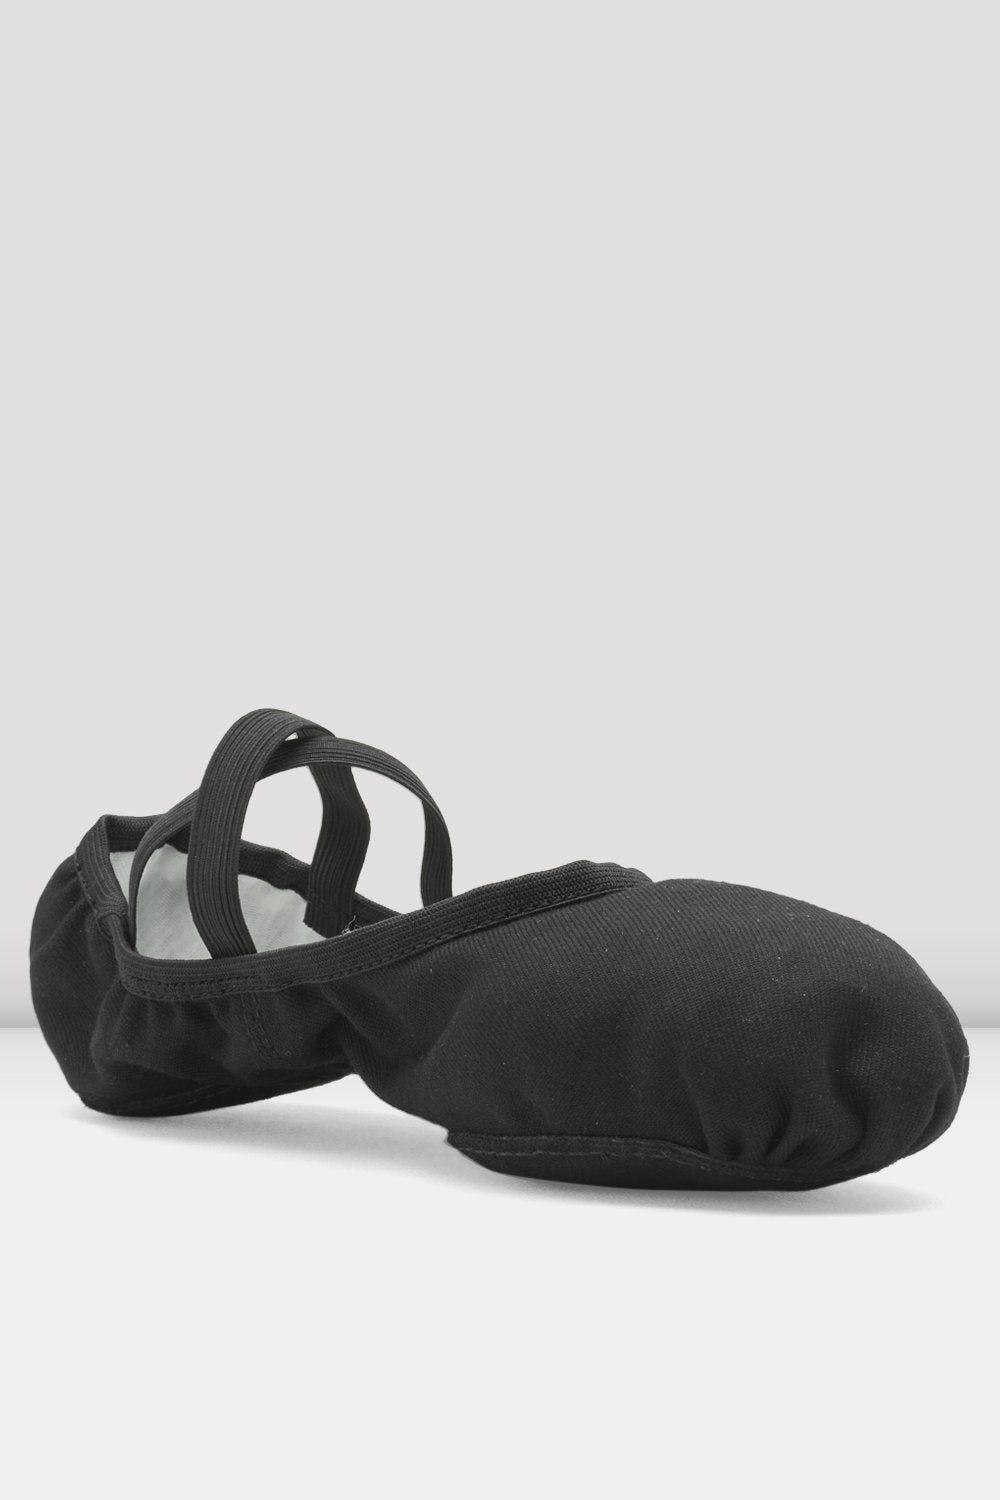 S0284M Mens Performa Stretch Canvas Ballet Shoes